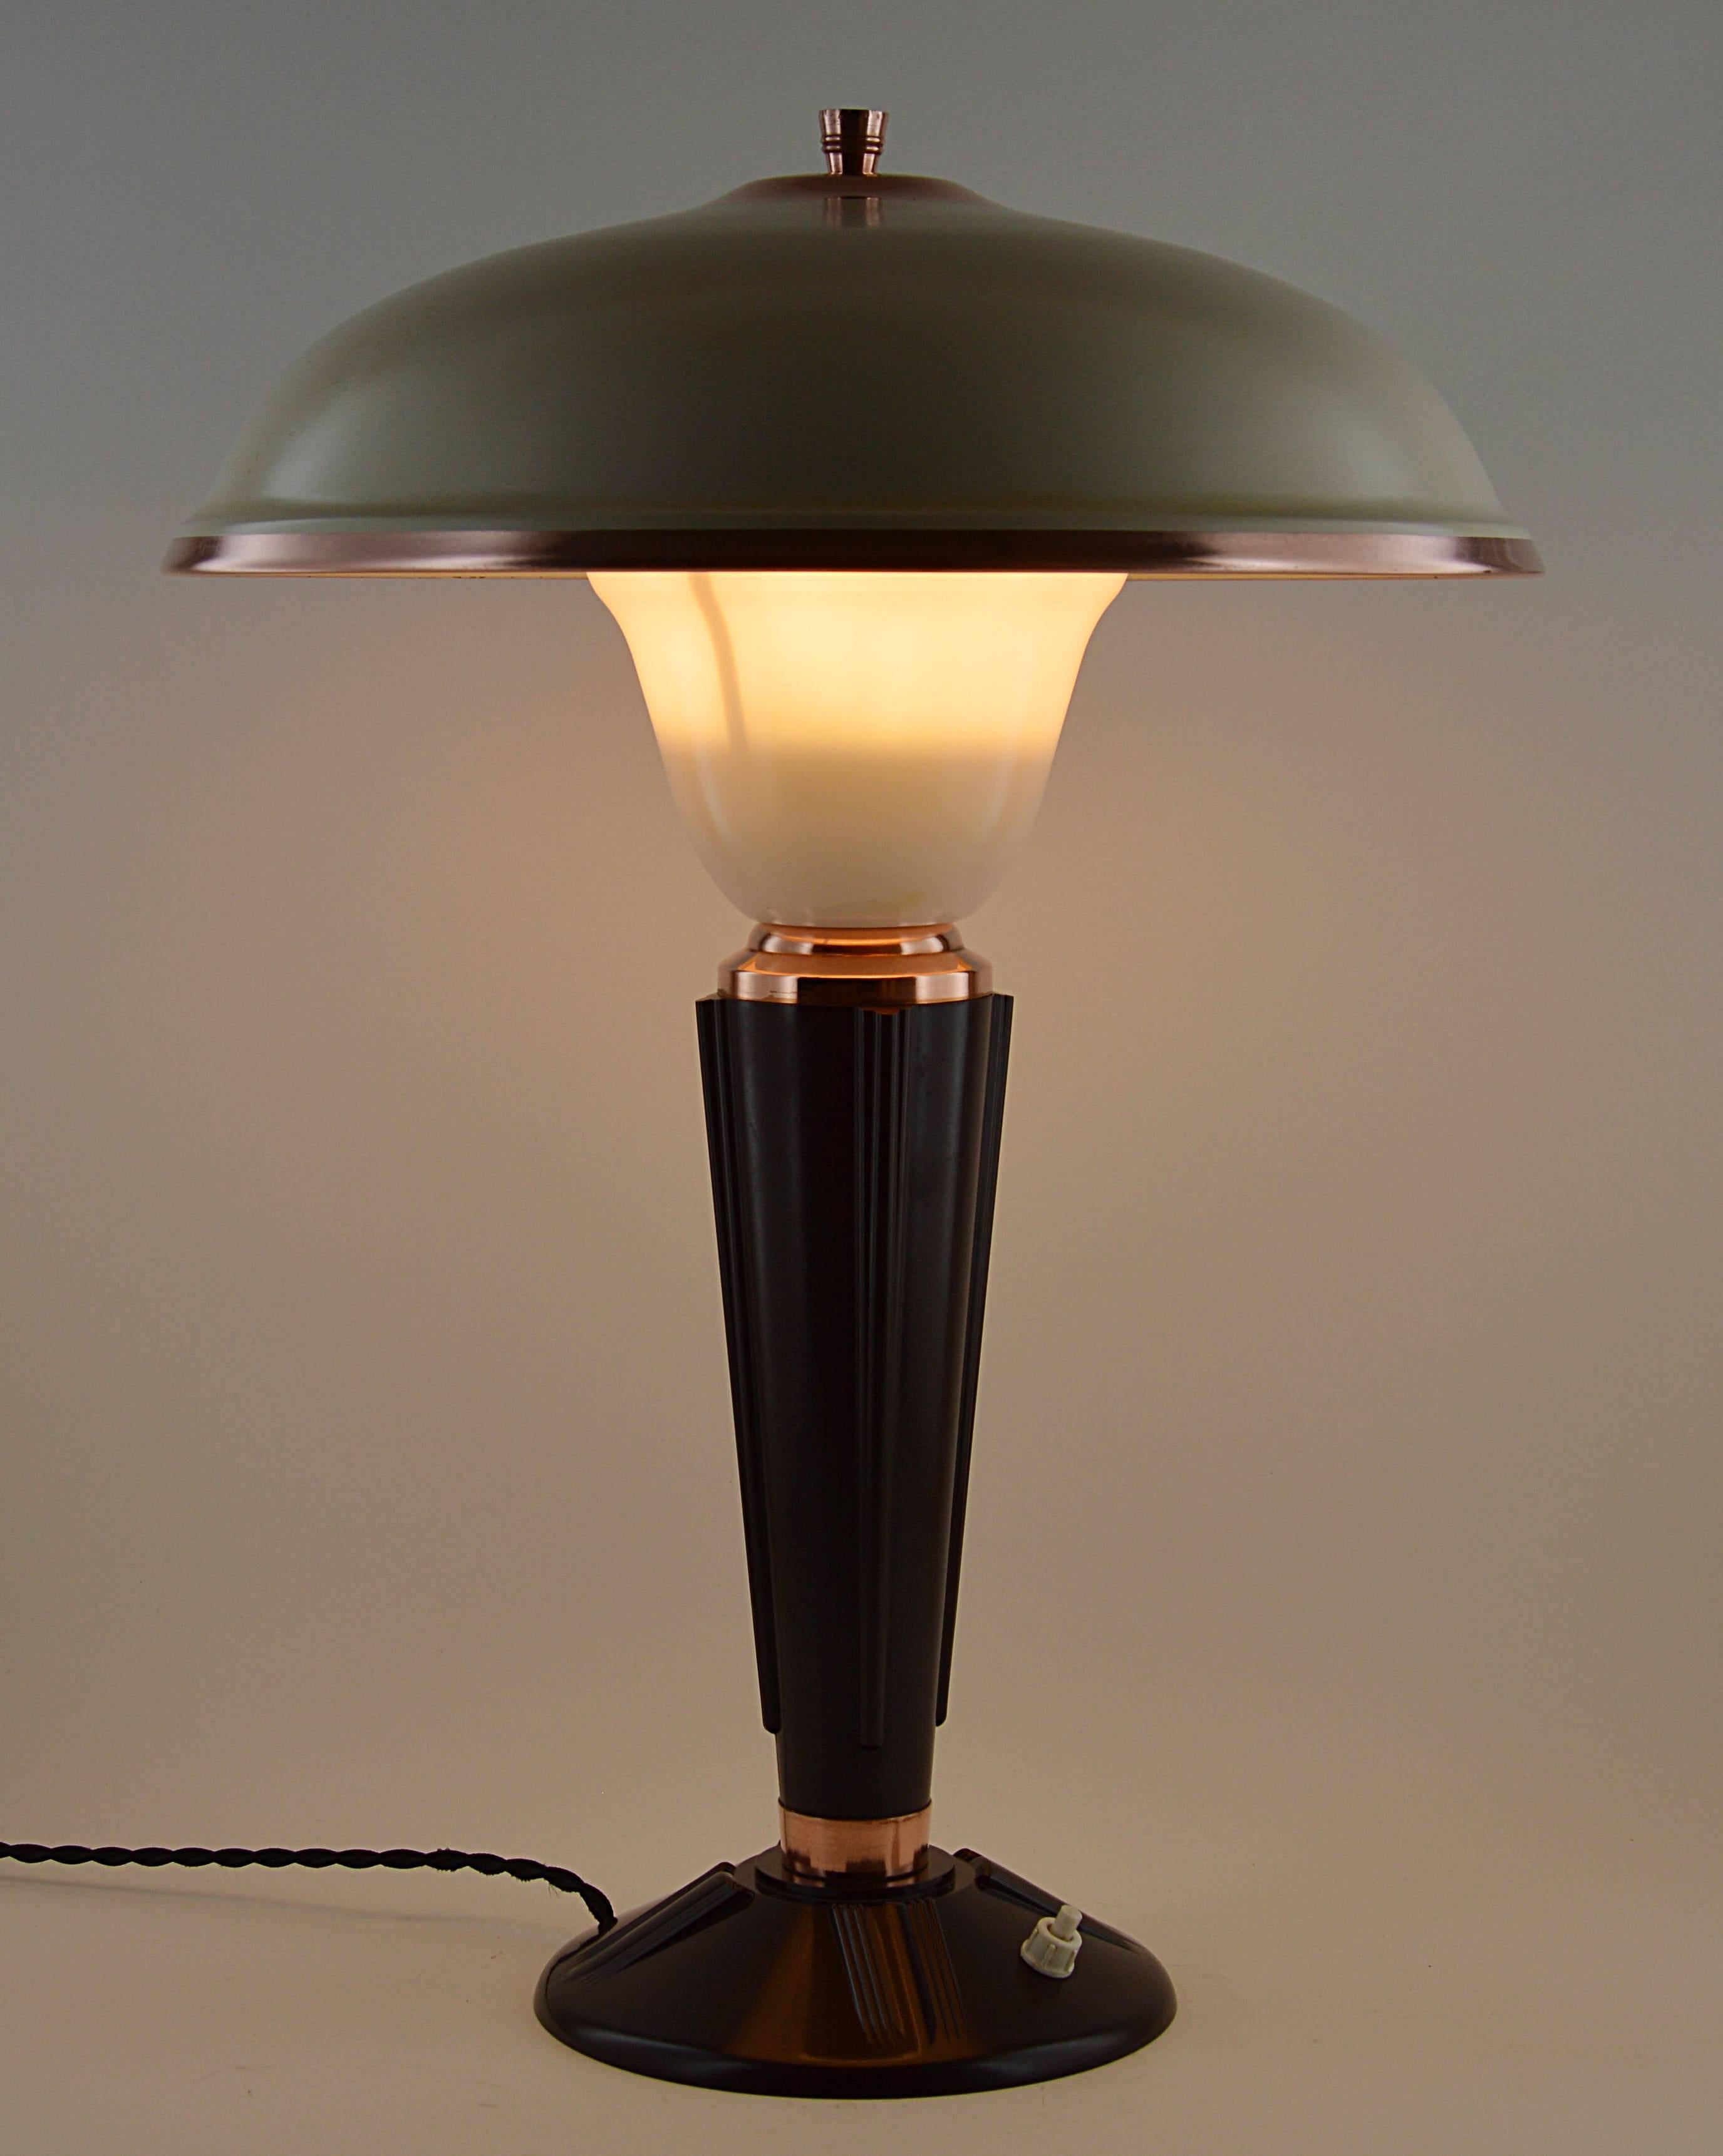 French Art Deco modernist table/desk lamp designed by Eileen Gray for Jumo company, Paris, late 1930s. Made of bakelite, plastic and copper. The bakelite base is in excellent condition. It comes with its internal plastic reflector and metal shade.